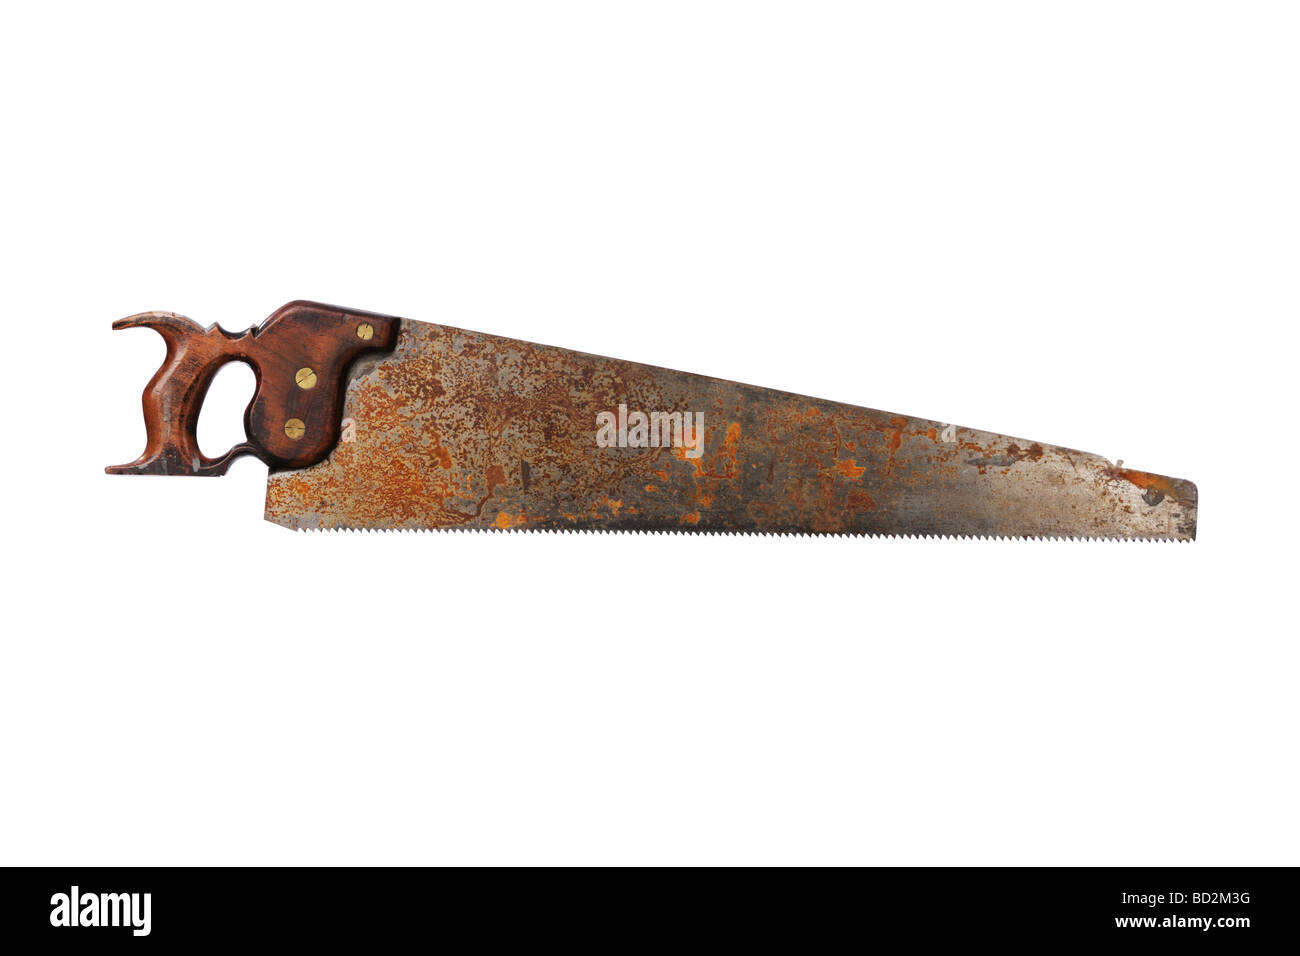 Rusted hand saw Stock Photo